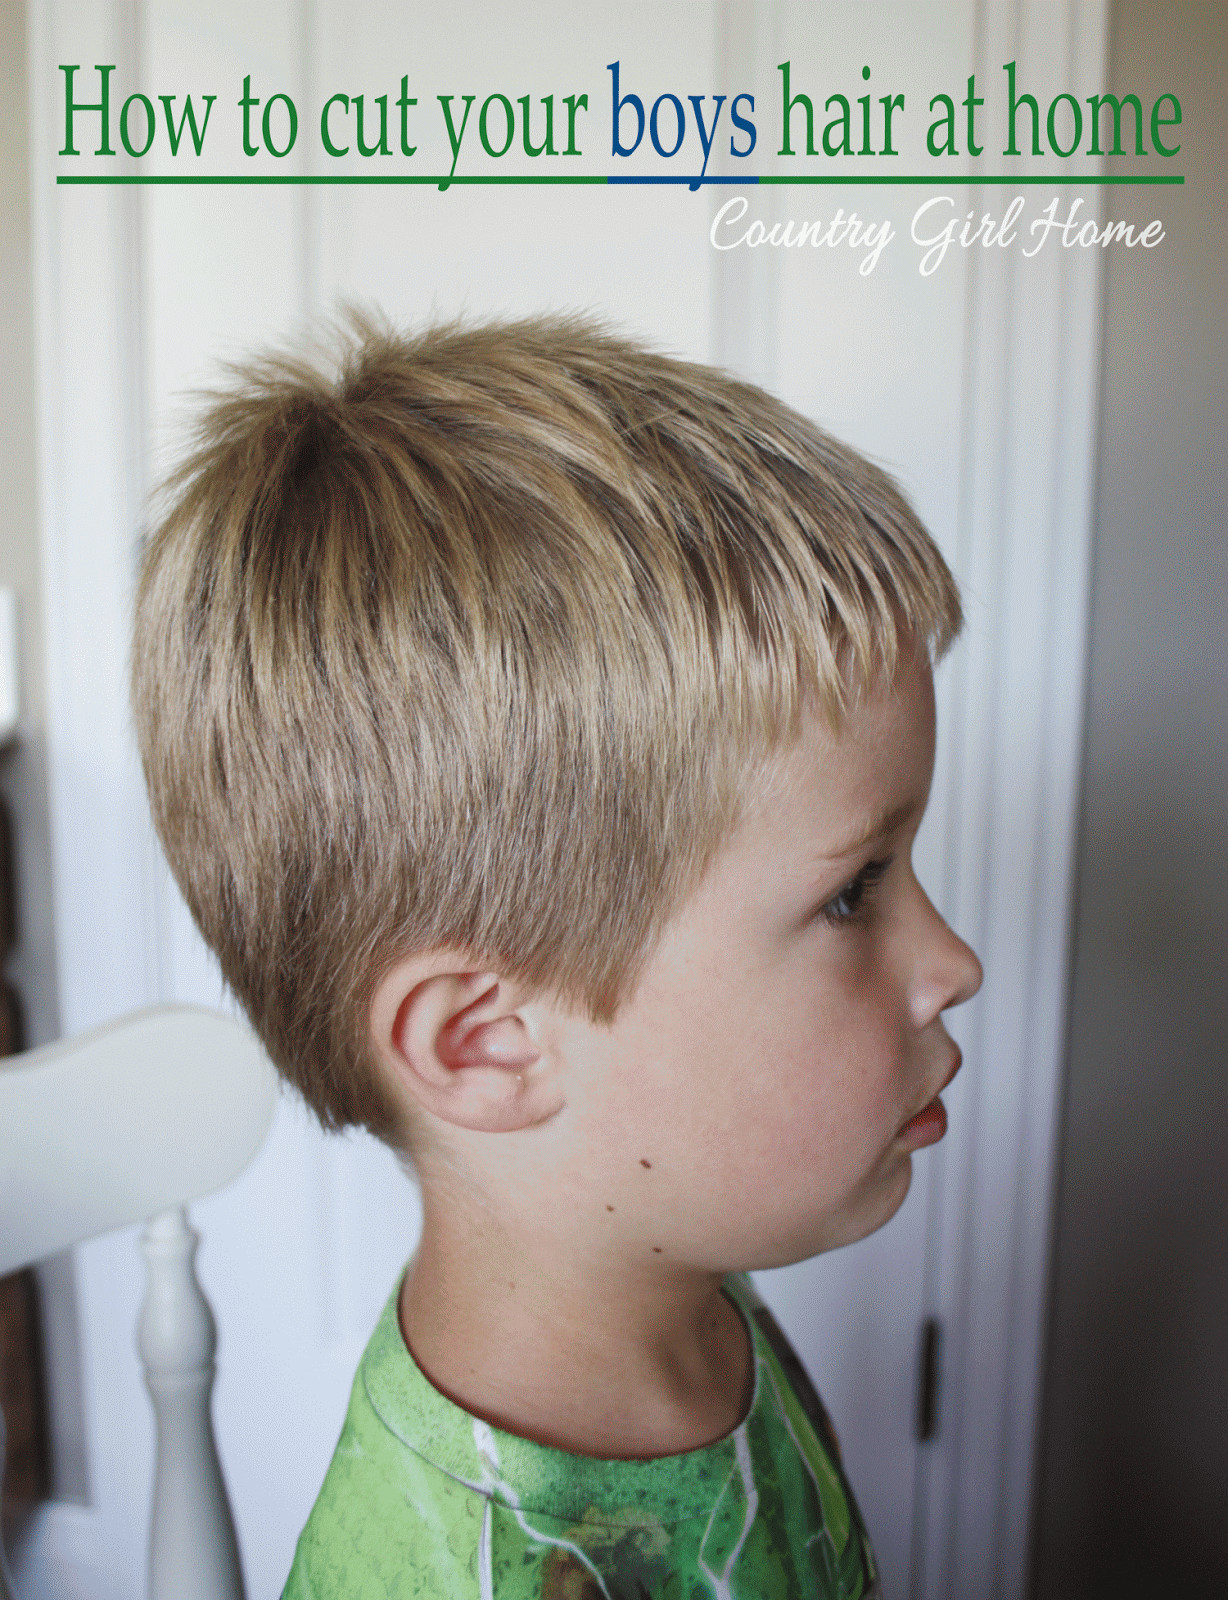 How To Cut Boys Hair With Scissors
 COUNTRY GIRL HOME How to cut your boys hair at home for